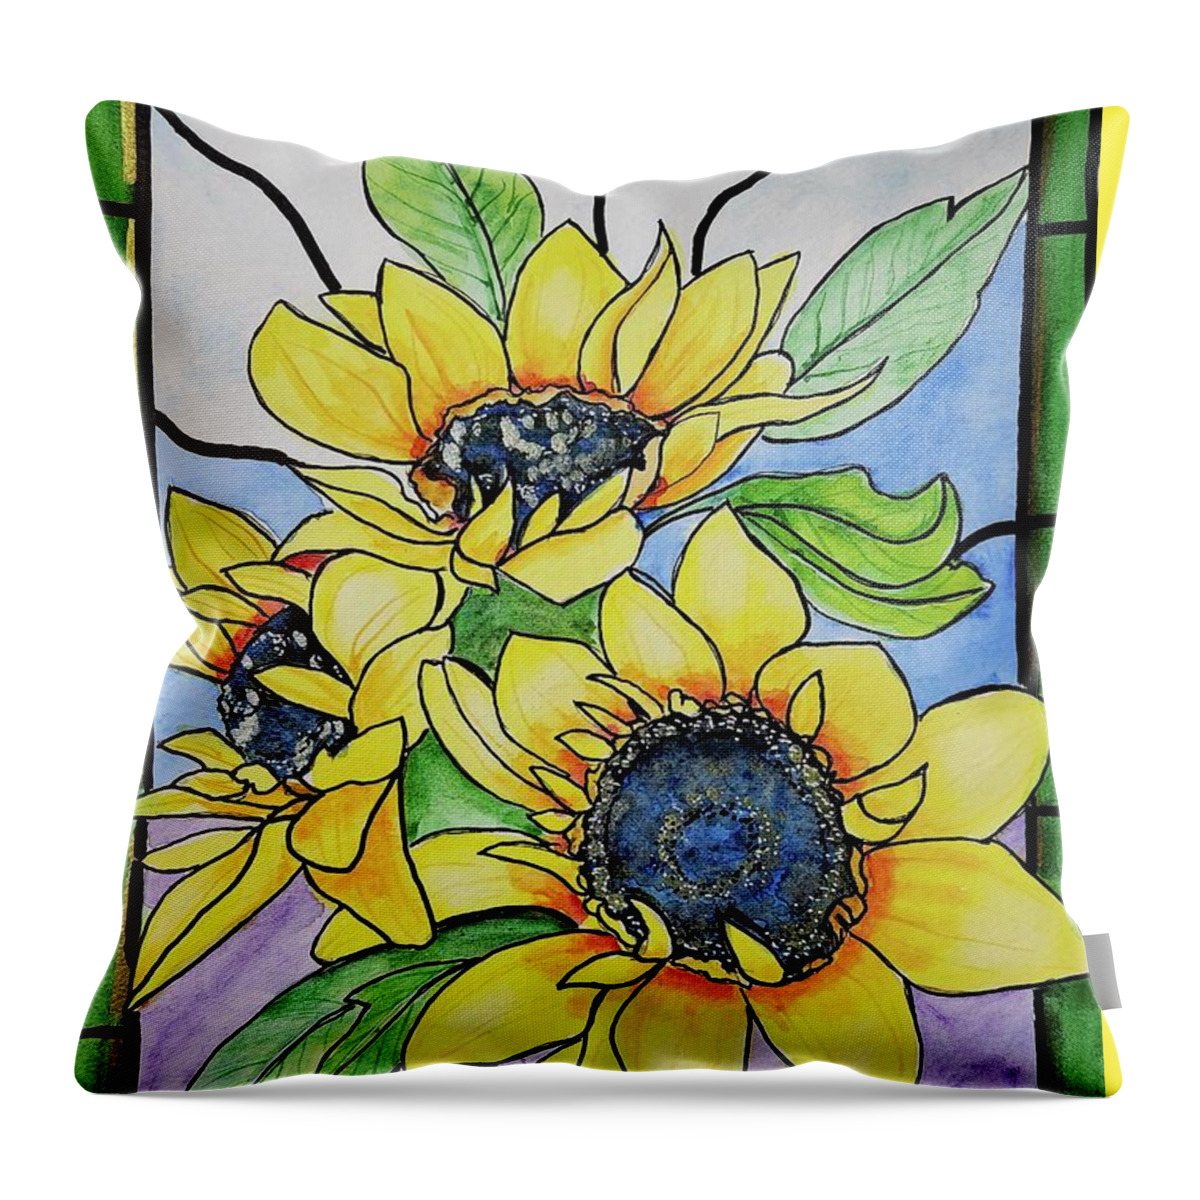 Sunflower Throw Pillow featuring the painting Sunflower #2 by Mindy Gibbs